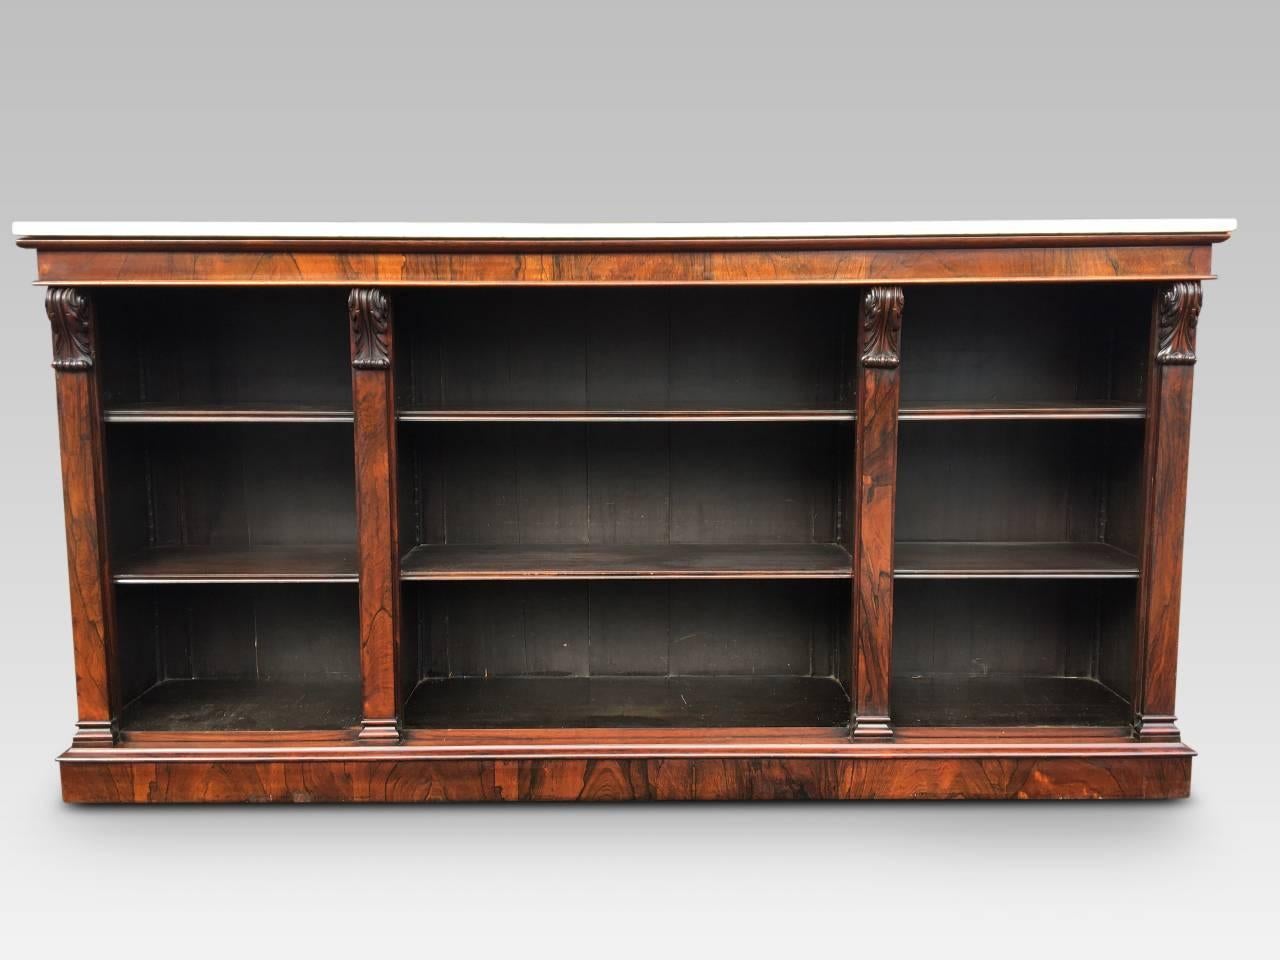 Superb long  and deep rosewood open bookcase, English, and dated to circa 1850. A most attractive and useful item with a glorious antique patination.  

This delightful library bookcase has loads of book space with six substantial and adjustable